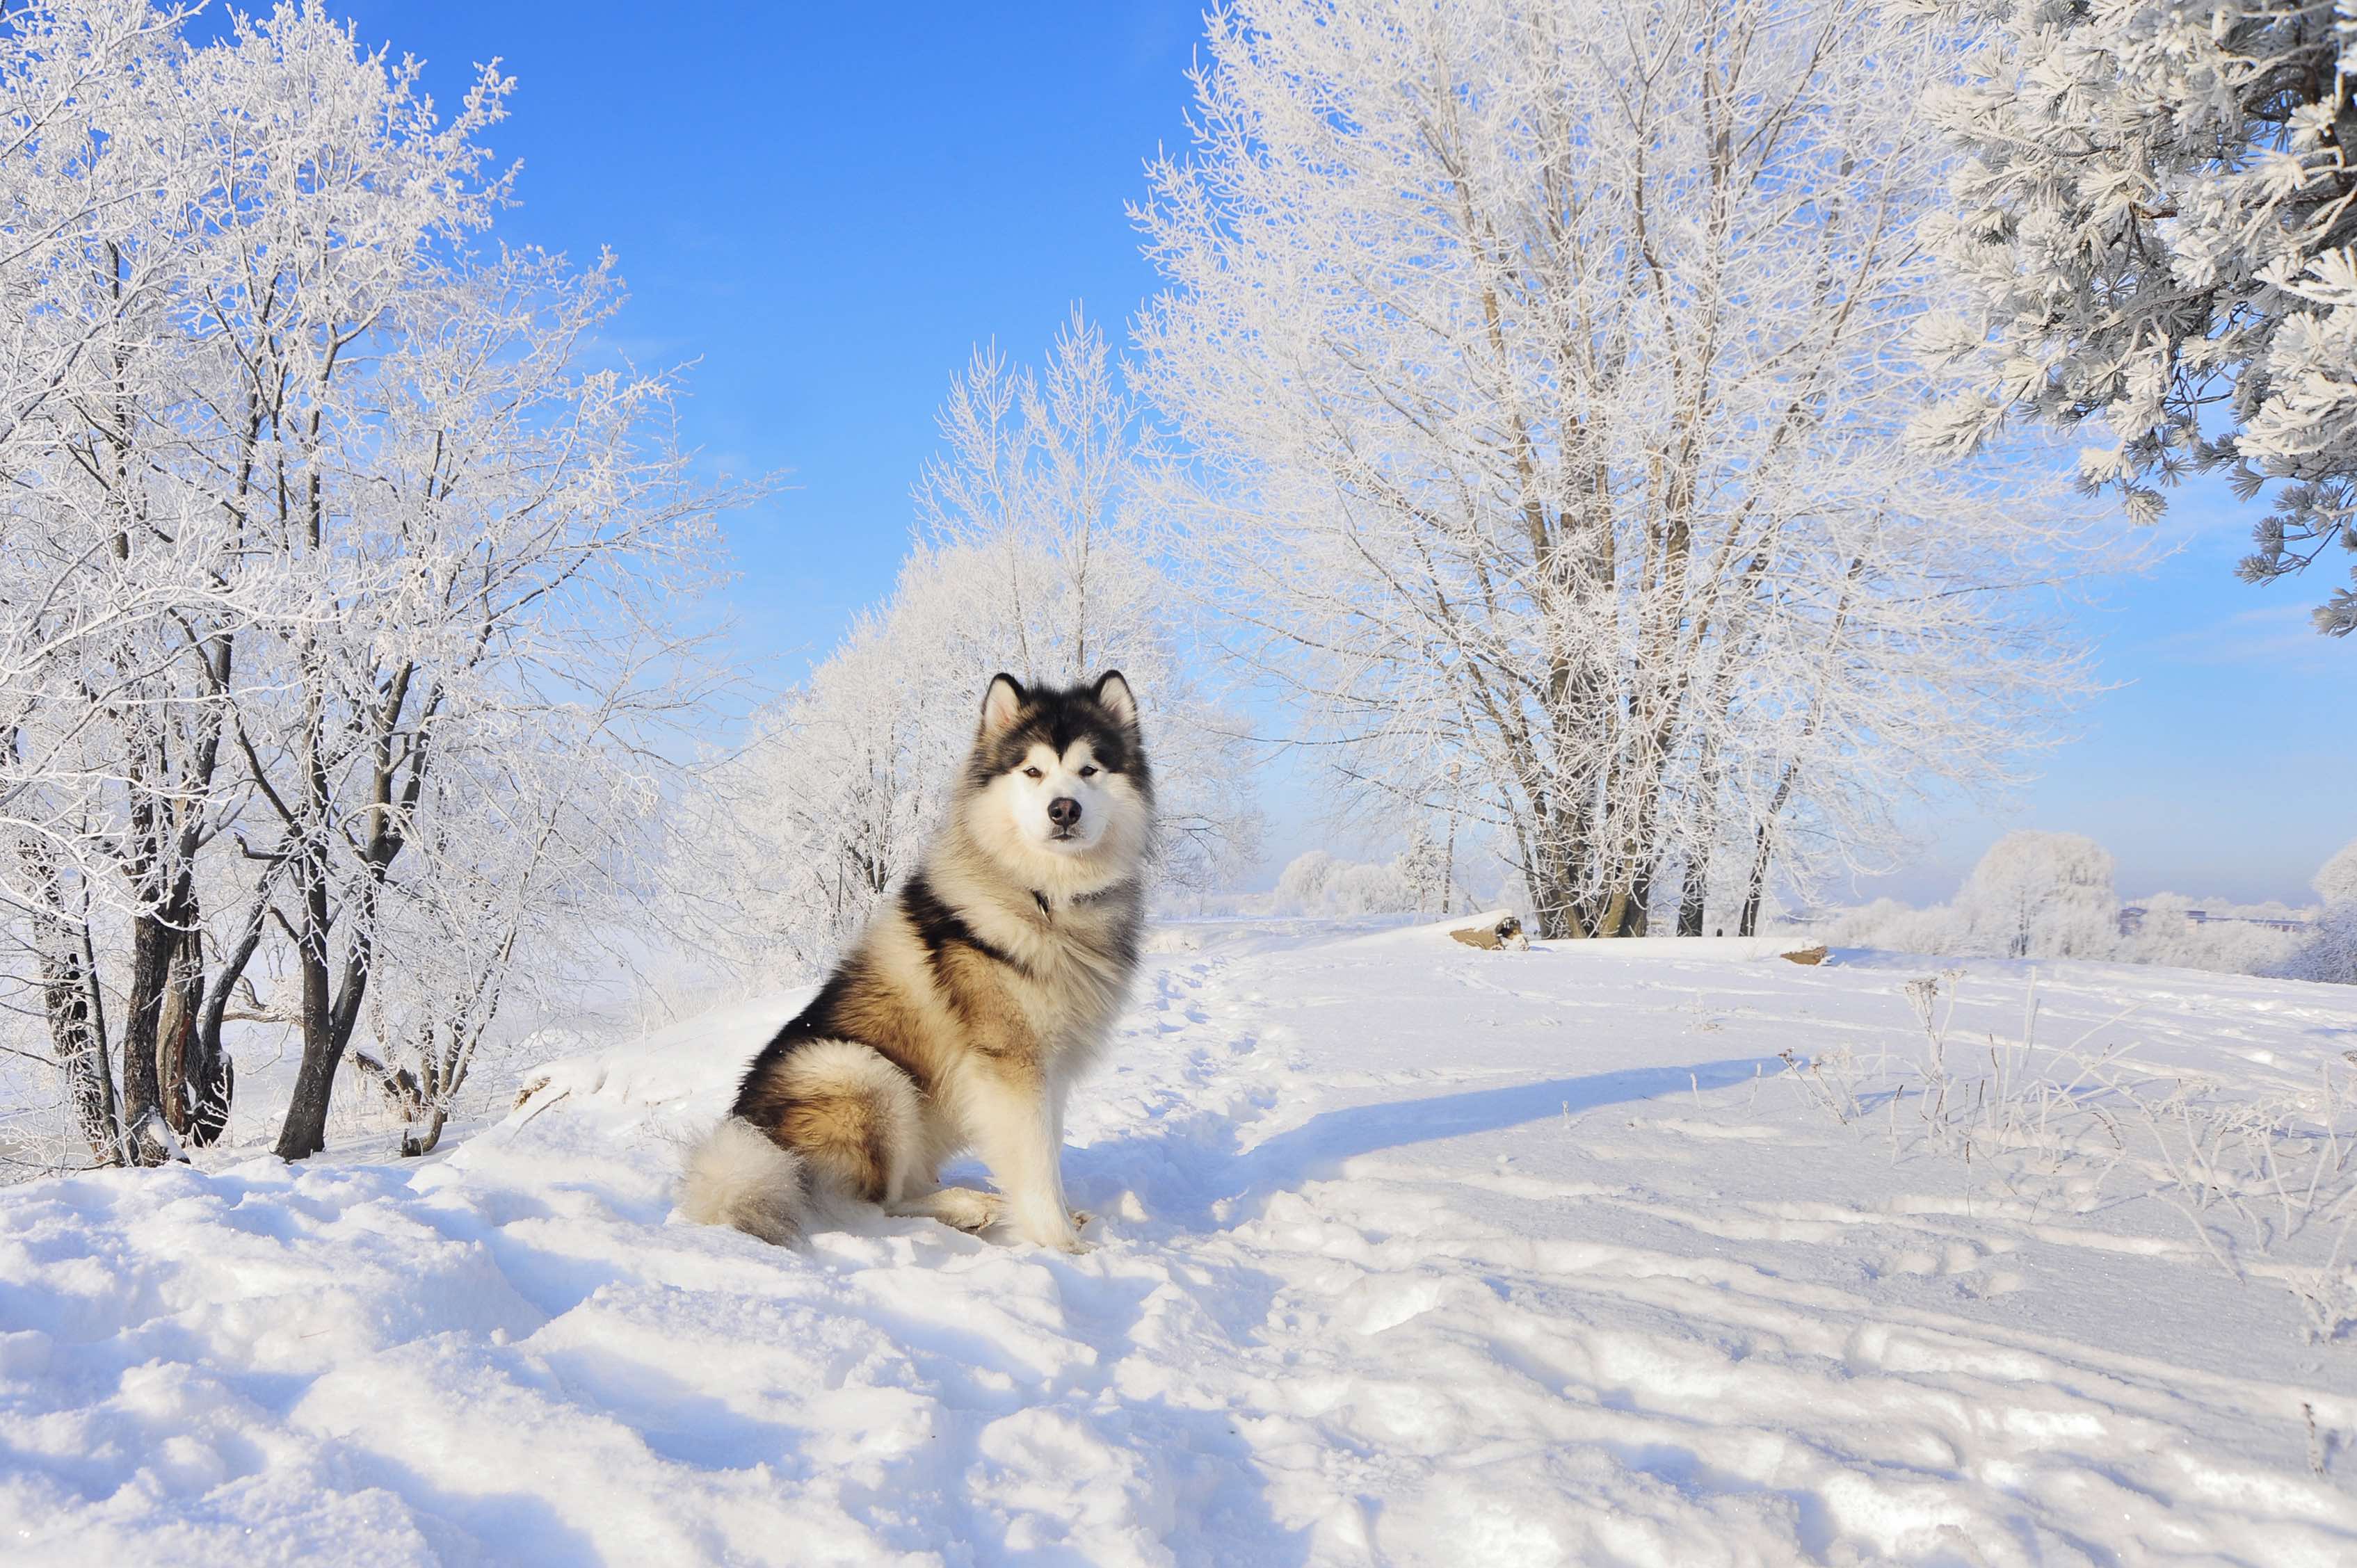 Gray and white Alaskan malamute dog sitting in the snow